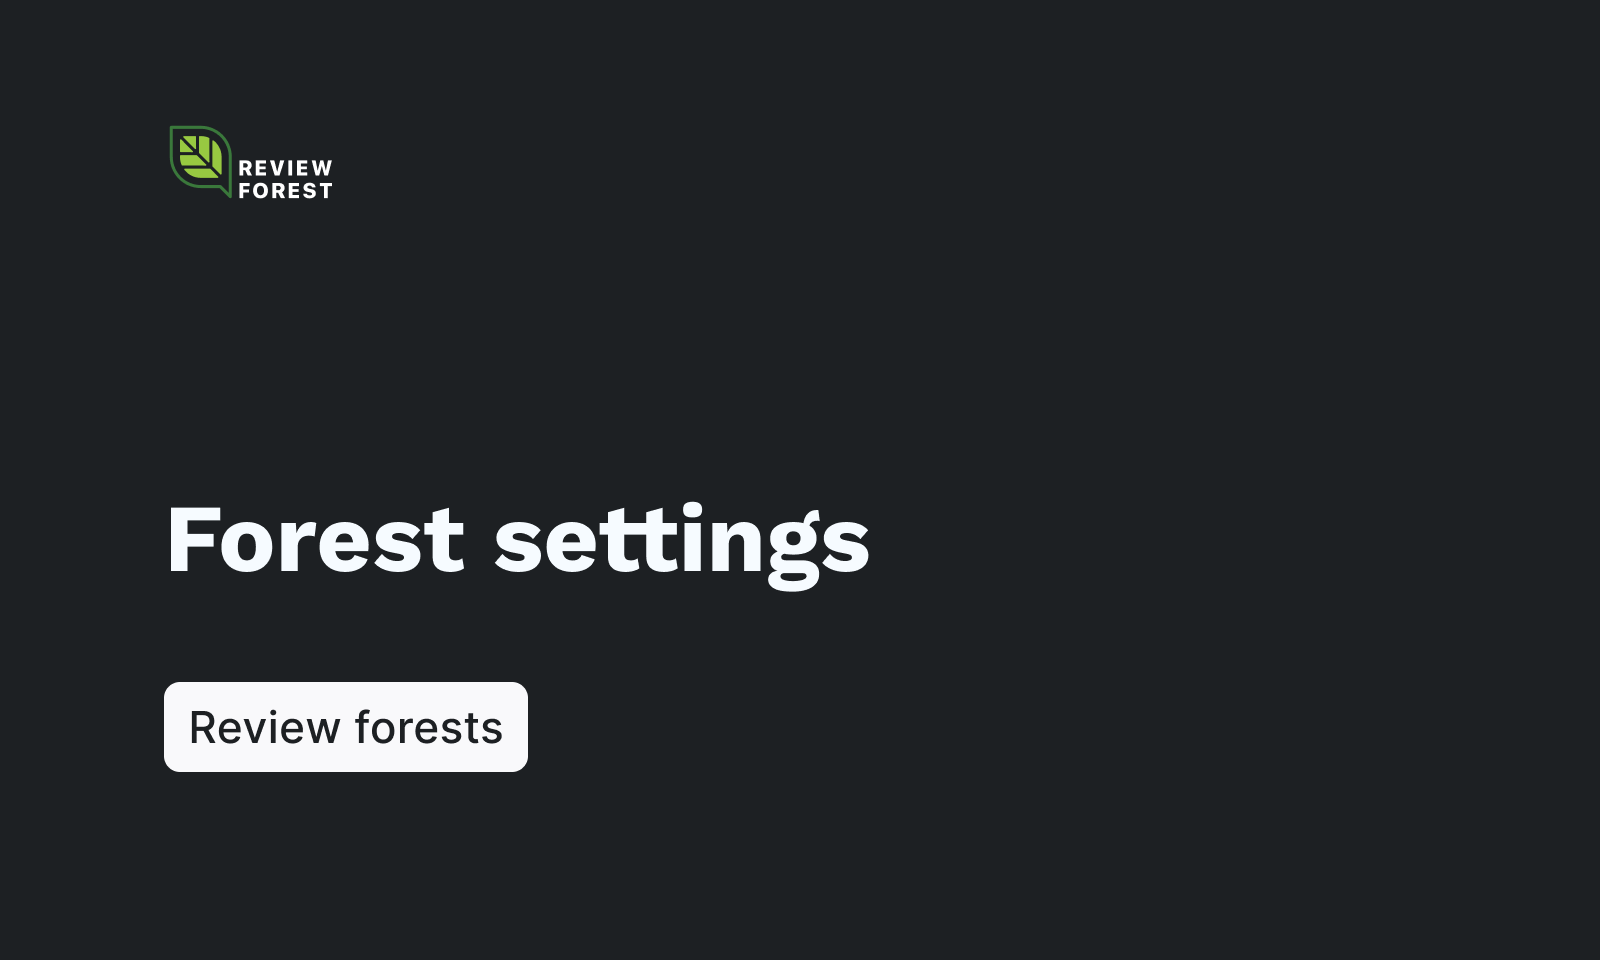 More Display Settings for your Review Forest